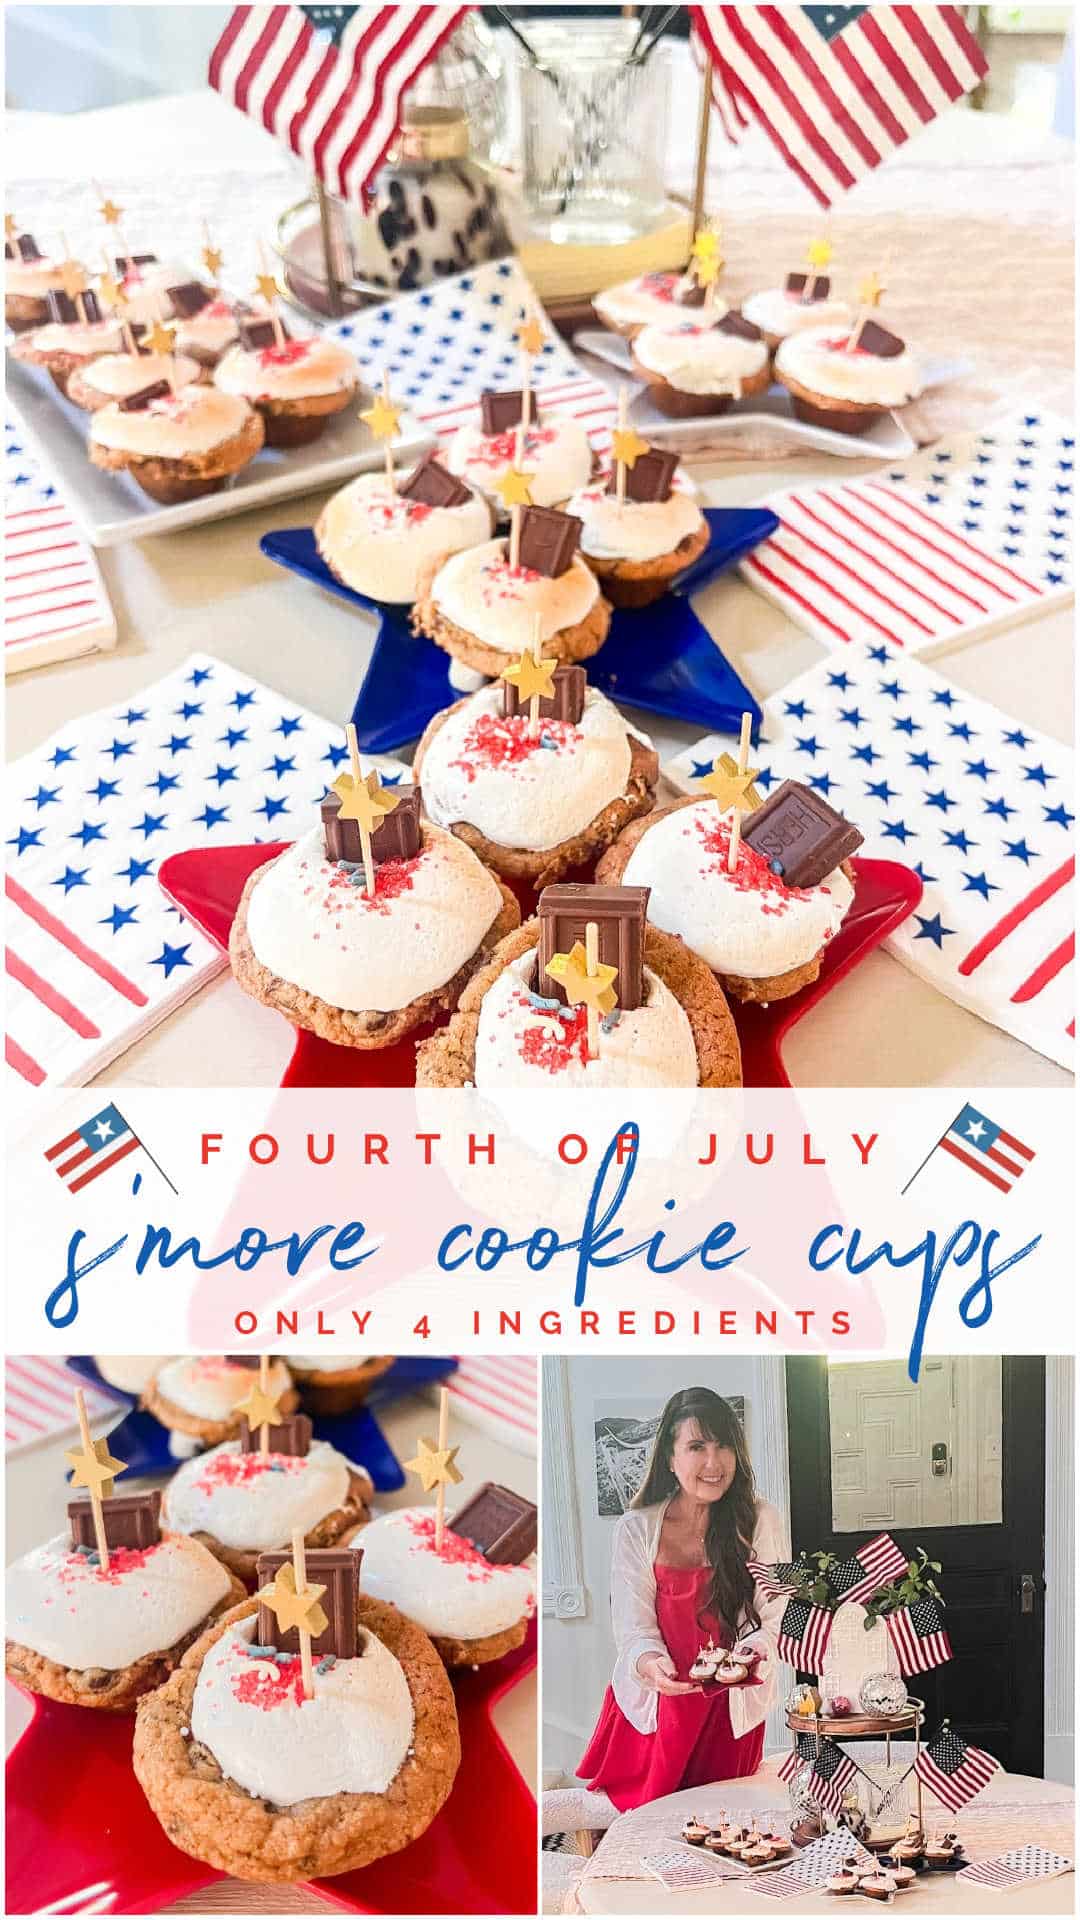 Fourth of July S'mores Cookie Cups. A festive treat that tastes just like a classic toasted s'more, with a delicious combination of crunchy, melty, and gooey textures.